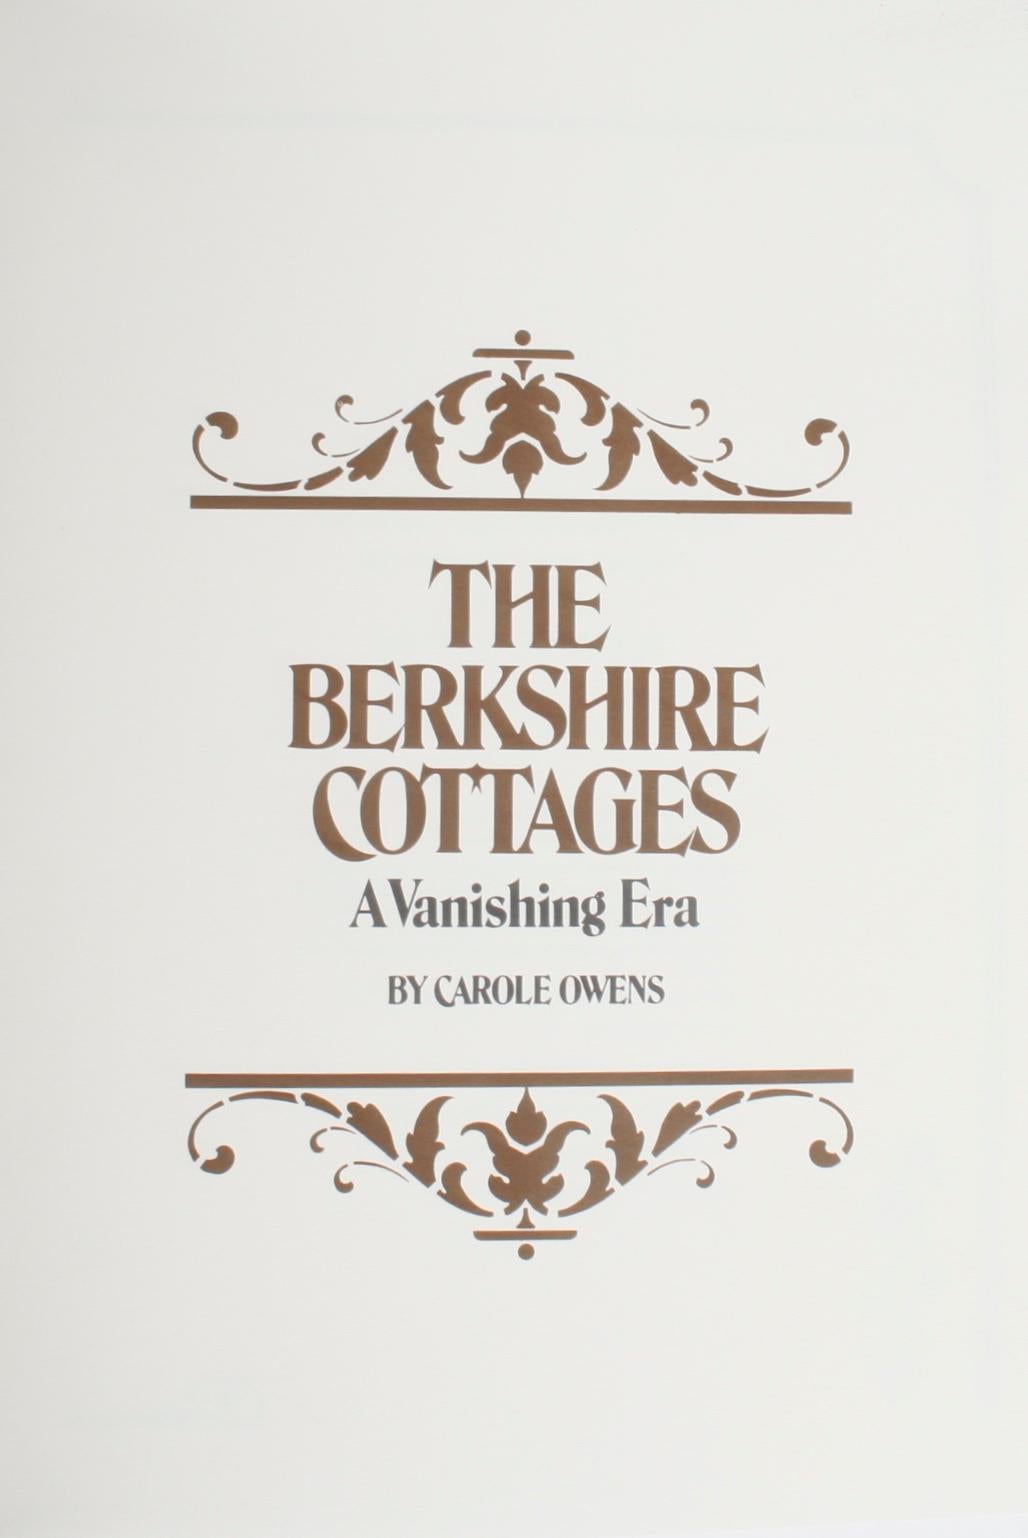 The Berkshire cottages, a vanishing era by Carole Owens. Cottage press, 1984. First Edition softcover. With color and B&W illustrations. Study of the 19th century homes in the Berkshire Hills of Western Massachusetts. Filled with historic photos of